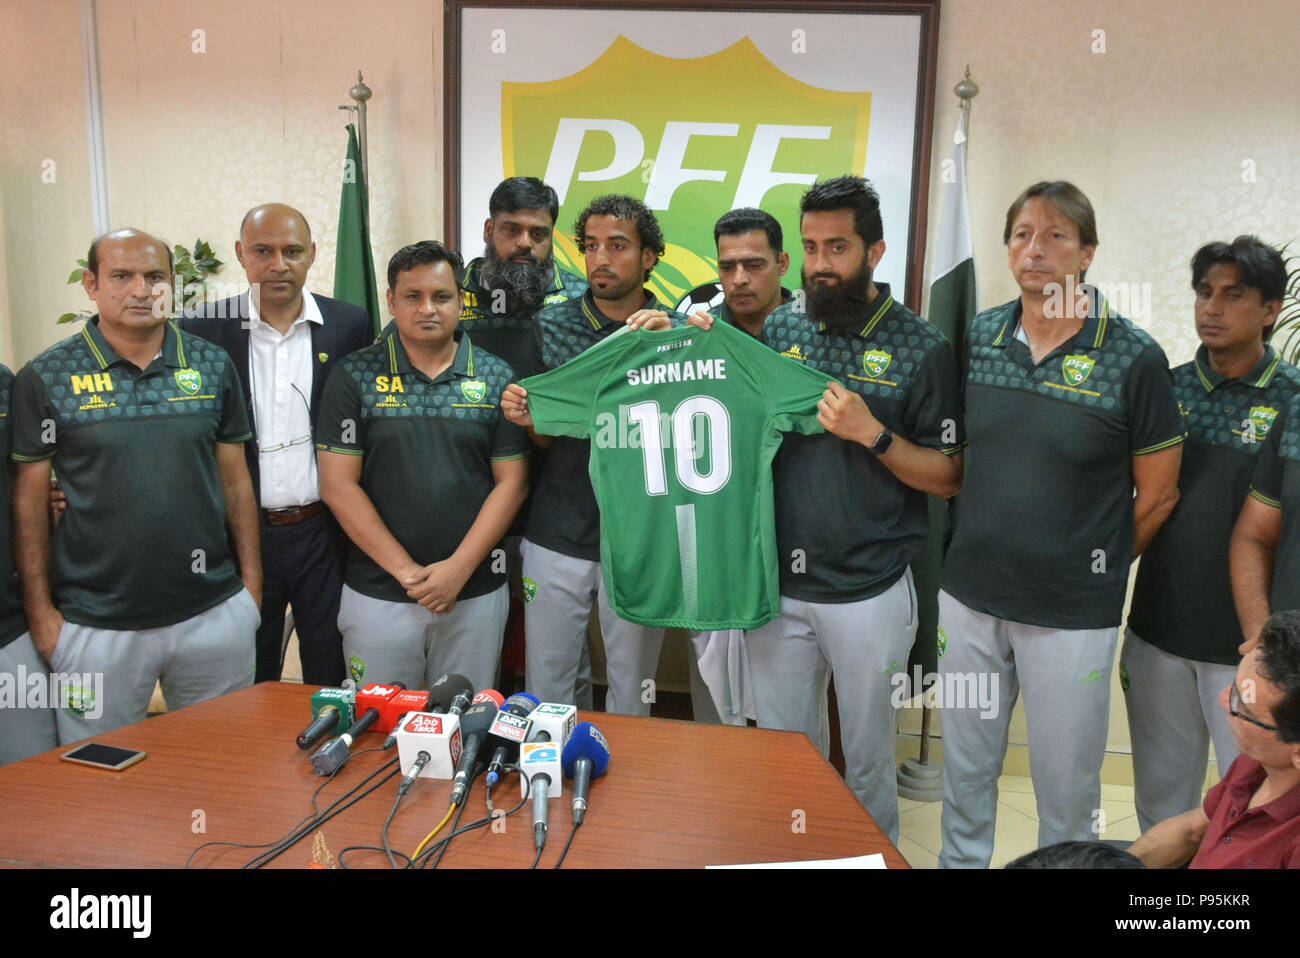 https://c8.alamy.com/comp/P95KKR/lahore-pakistan-15th-july-2018-pakistani-officials-brazilian-head-coach-jose-antonio-nogueira-coach-shahid-anwar-media-marketing-manager-shahid-khokhar-and-players-of-national-football-team-unveiling-the-kits-of-upcoming-event-during-a-press-conference-at-pakistan-football-federation-office-in-lahore-credit-rana-sajid-hussainpacific-pressalamy-live-news-P95KKR.jpg